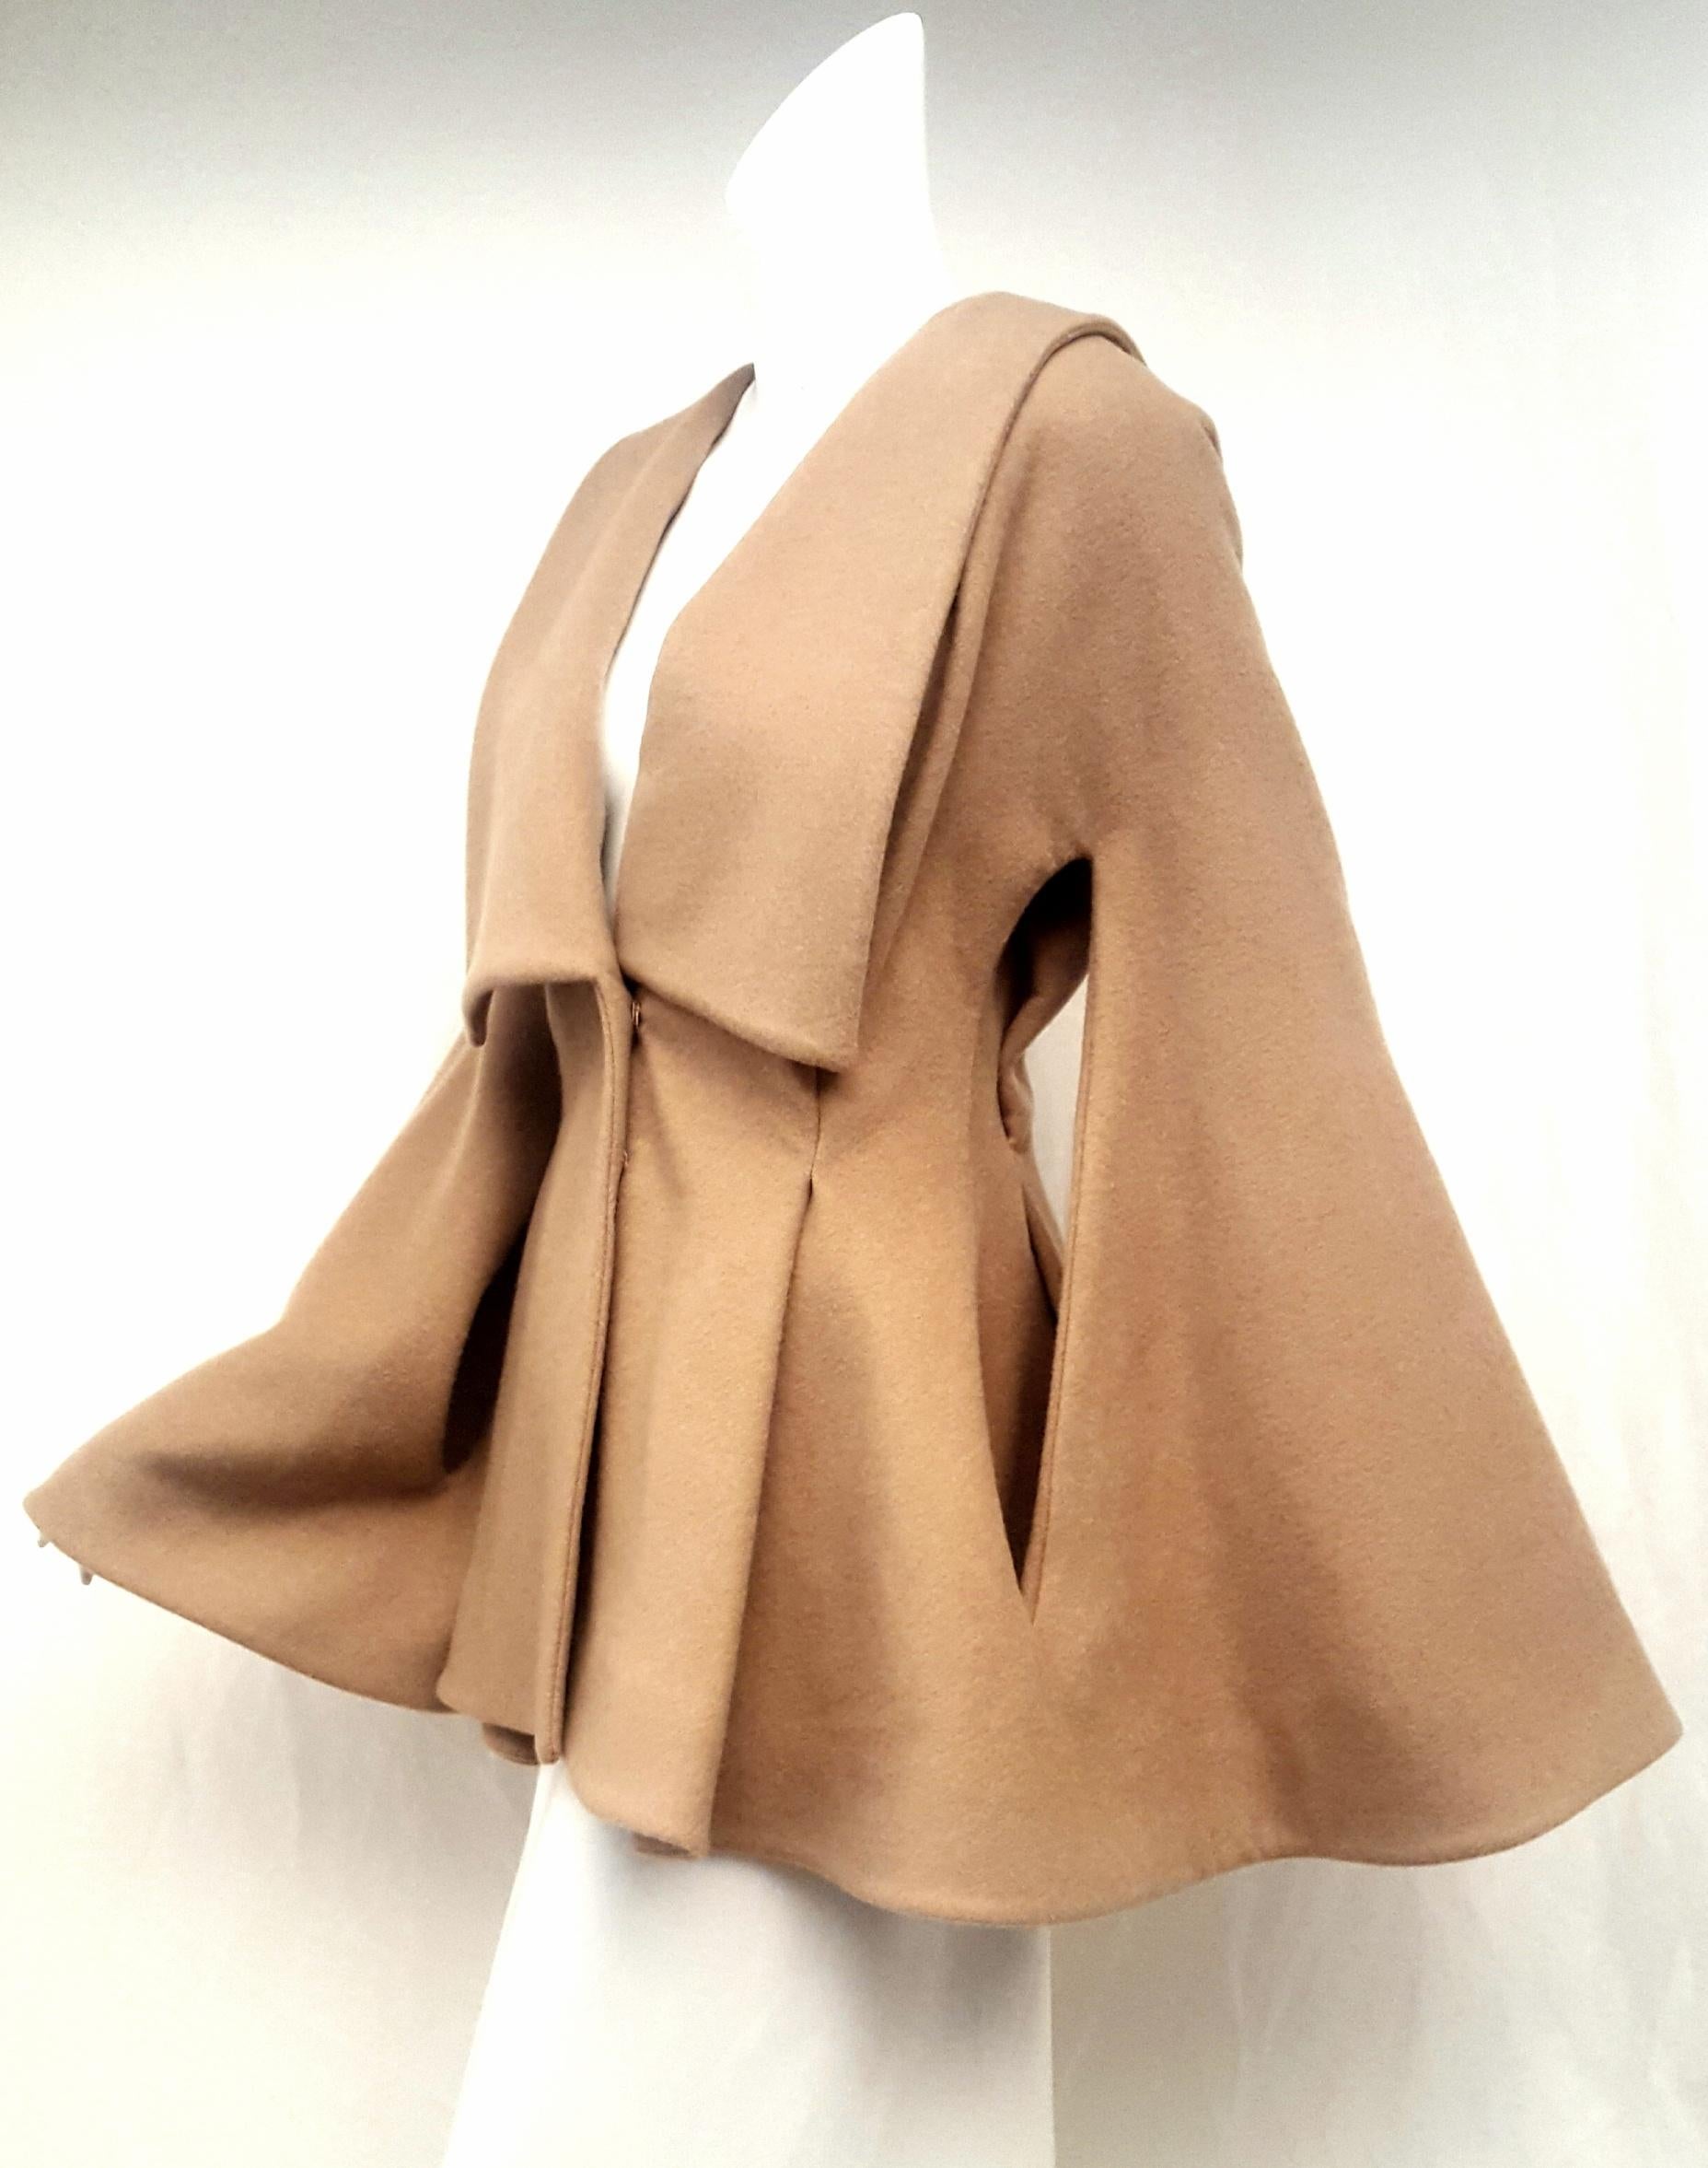 Alexander McQueen Camel hair jacket with shawl collar is gathered at the waist with wide pleats at front and back for that cinched and flared look.  Savile Row trained Alexander McQueen was a fashion visionary whose shows fused radical theatrics